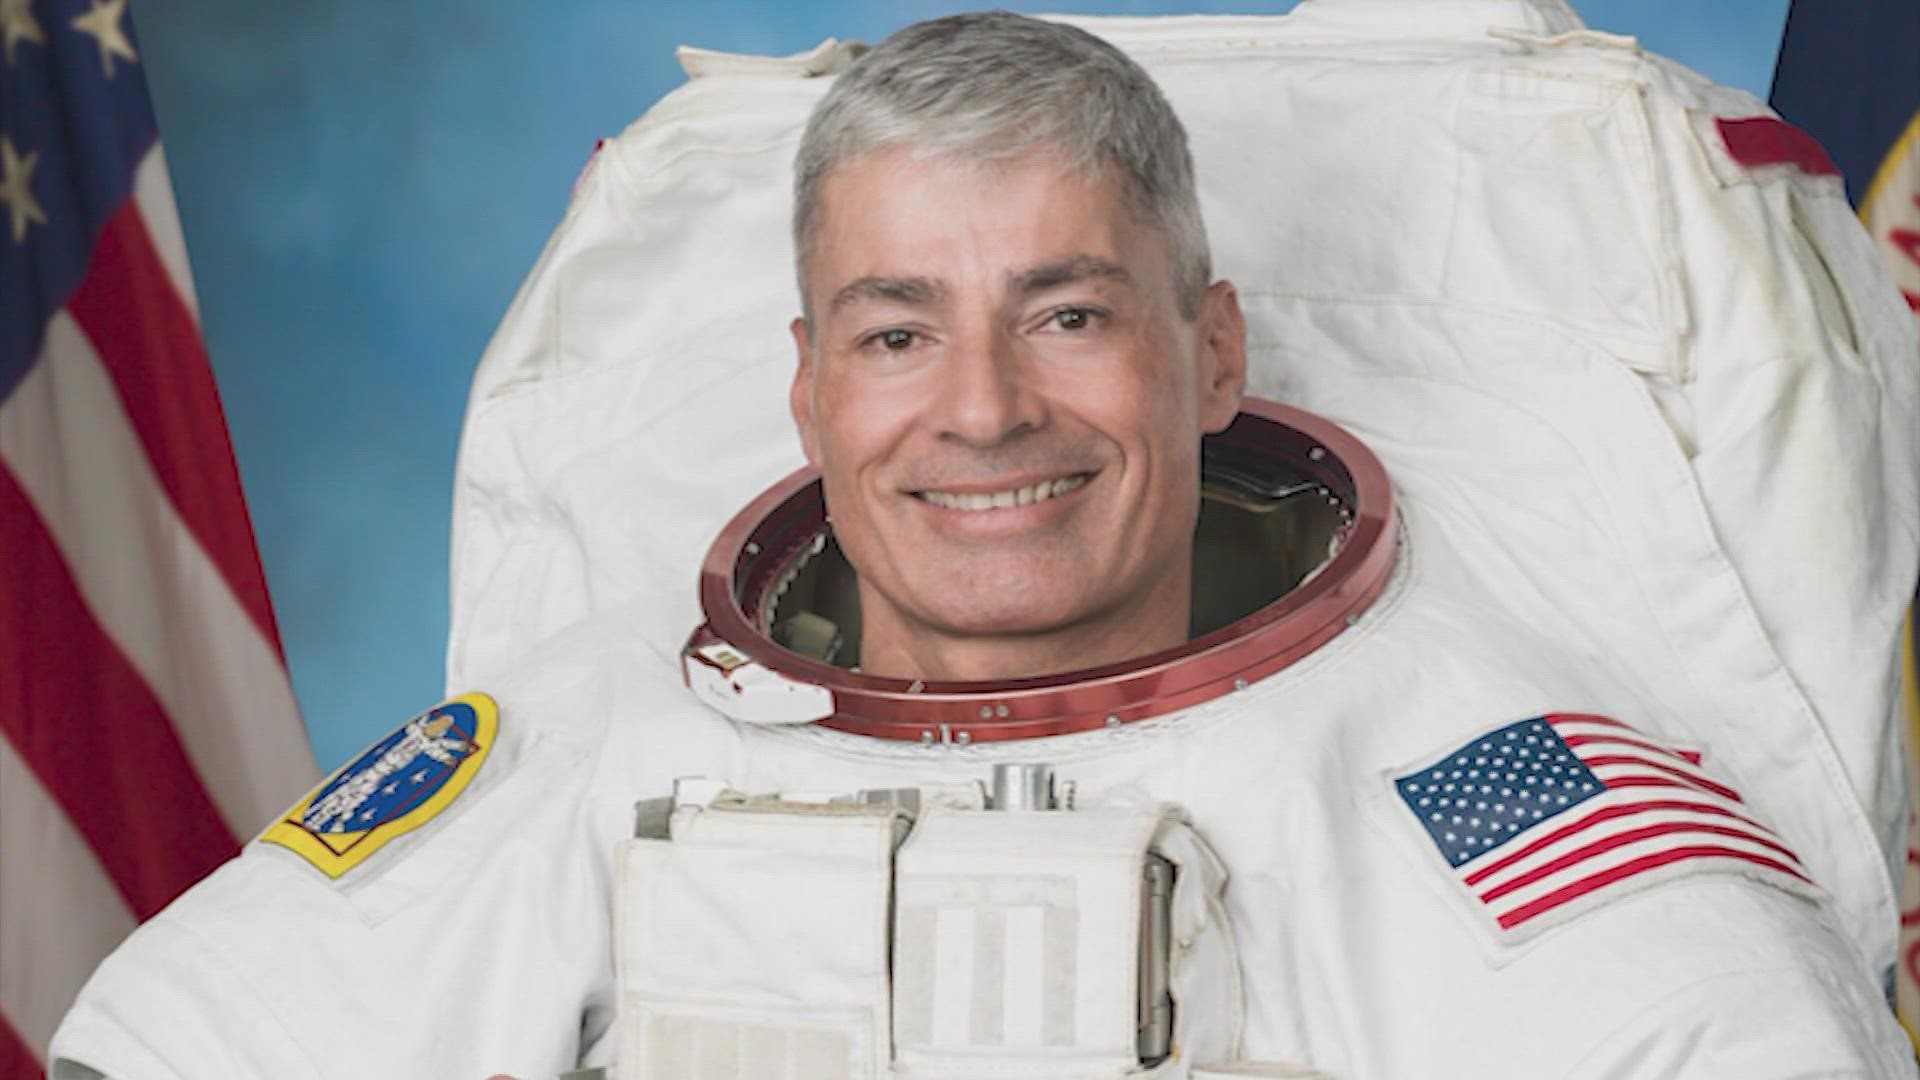 After nearly a year in space, NASA astronaut Mark Vande Hei is scheduled to return to Earth on March 30.